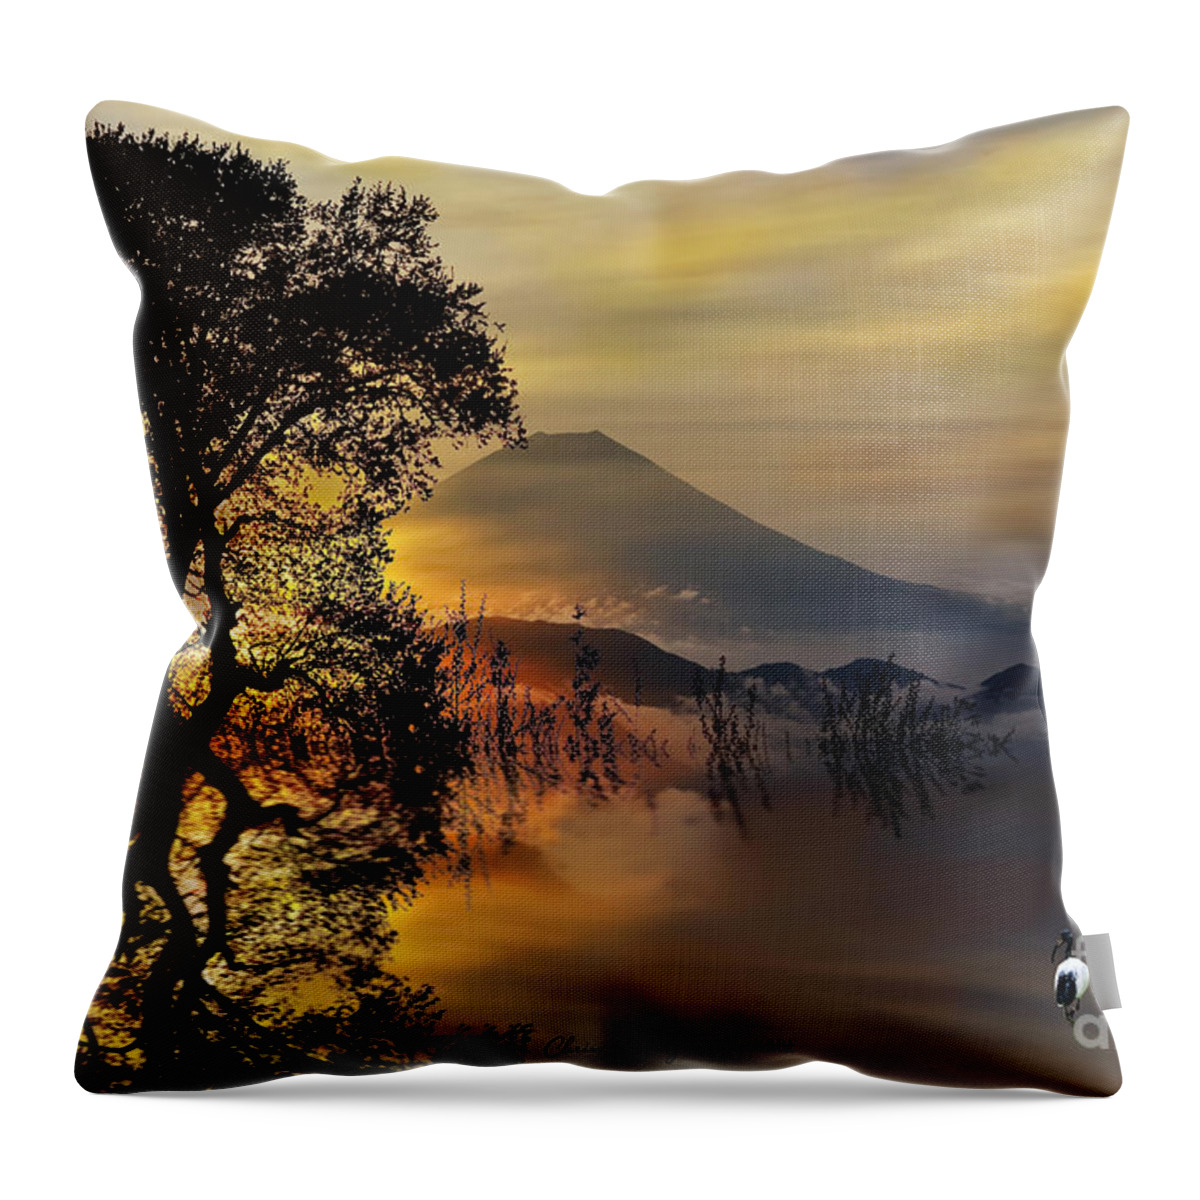 Landscape Throw Pillow featuring the digital art The Days Blank Slate by Chris Armytage